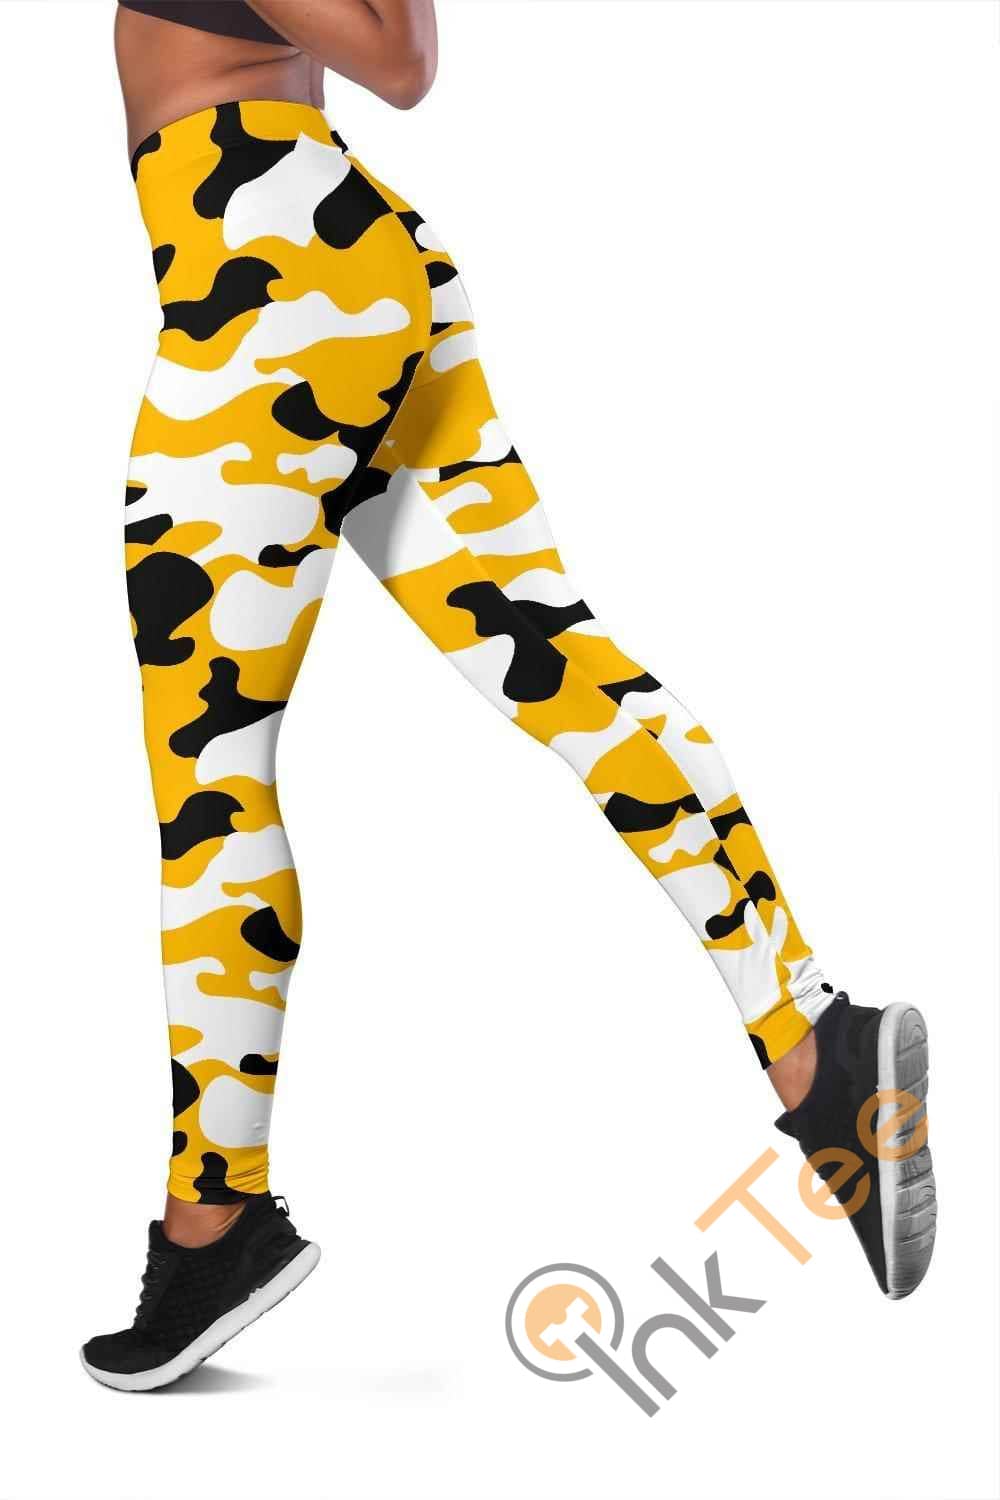 Inktee Store - Pittsburgh Steelers Inspired Tru Camo 3D All Over Print For Yoga Fitness Fashion Women'S Leggings Image